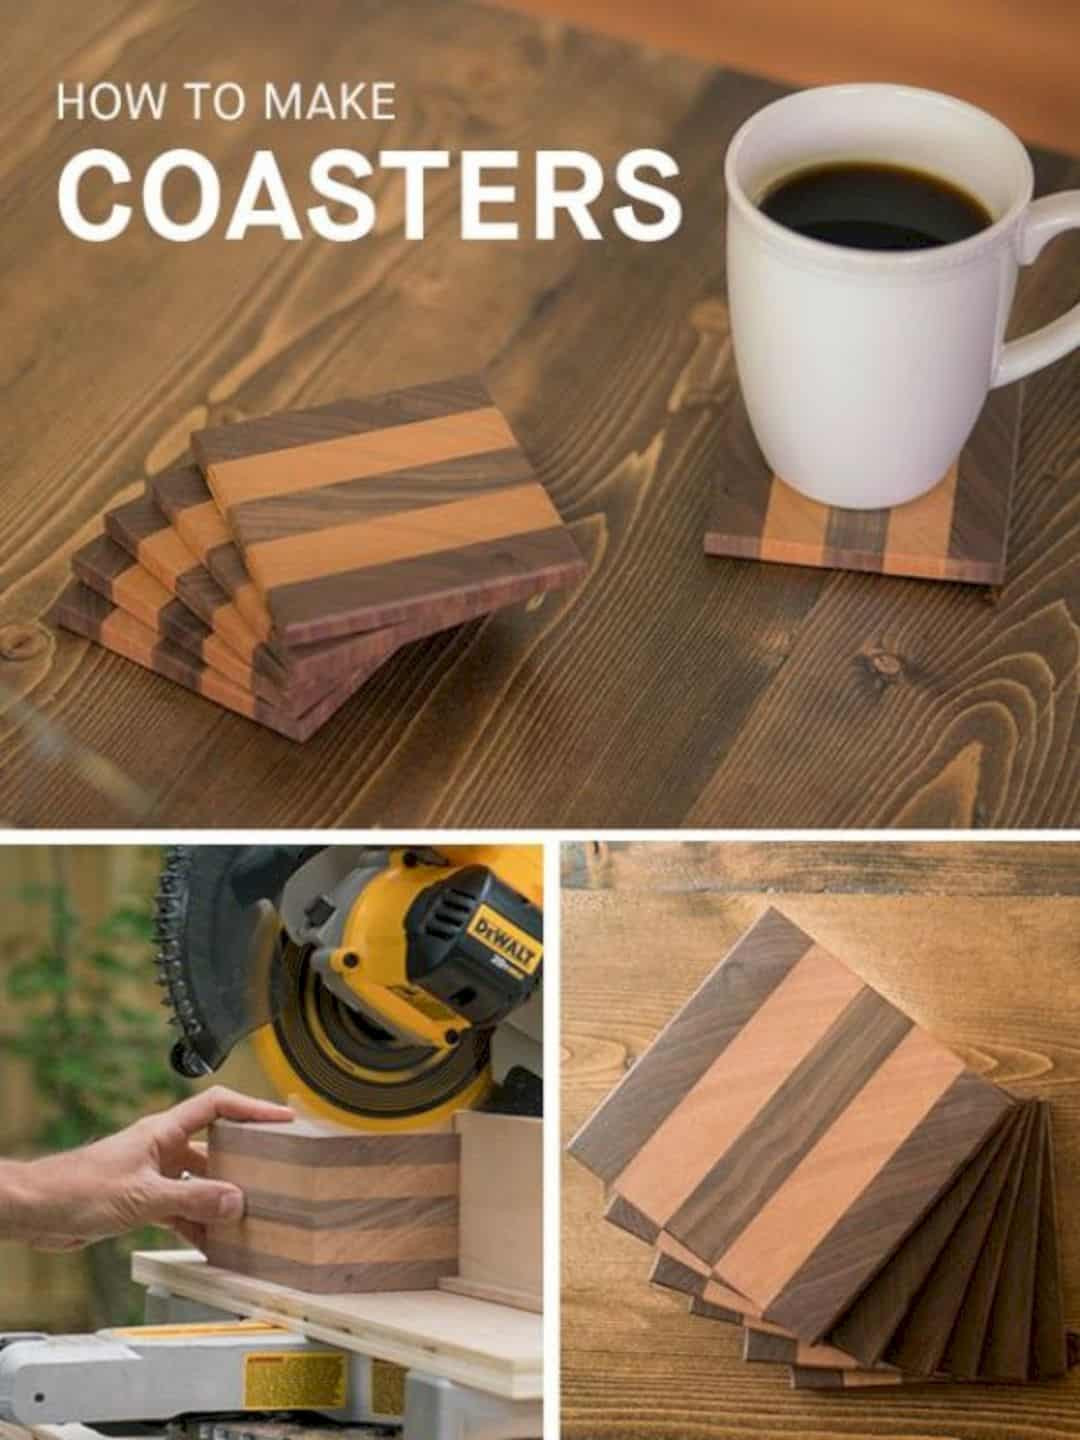 Wood Craft Gift Ideas
 16 Home Decor Ideas with Waste Materials